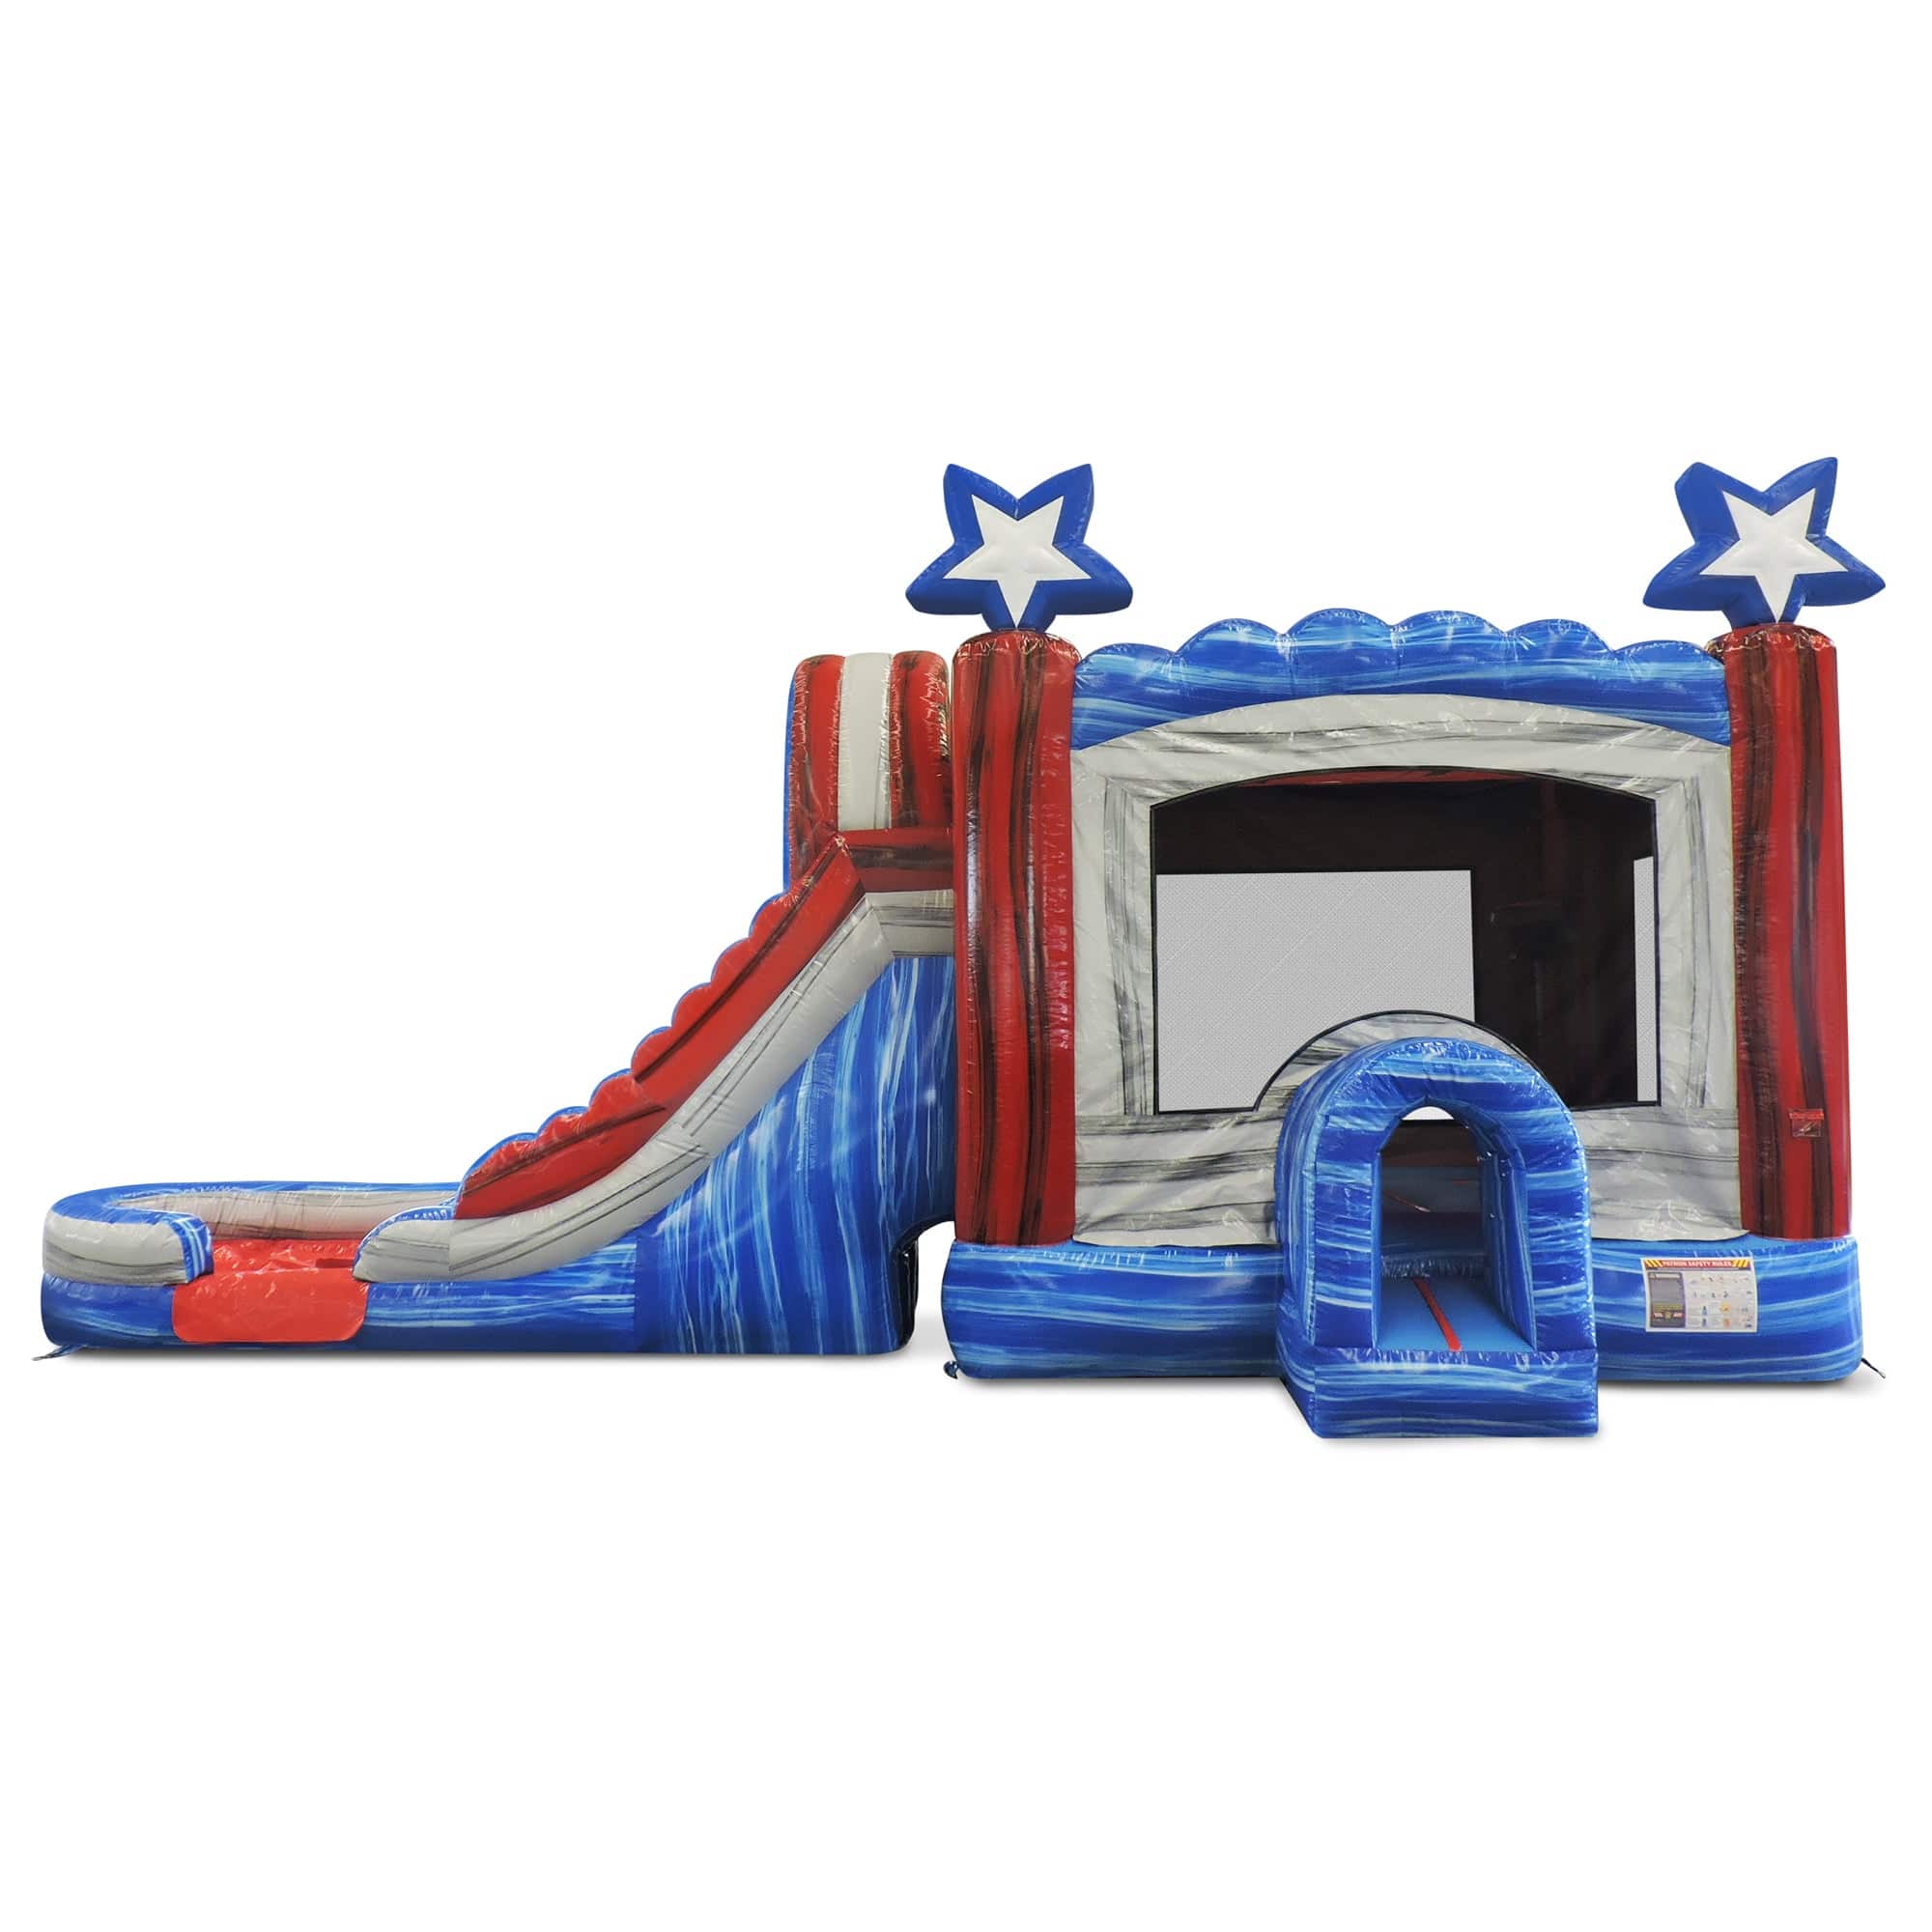 Star Wars Bouncy Castle 5 In 1 Combo Bounce House Happy Hop Slide Fun Inflatables Near Me